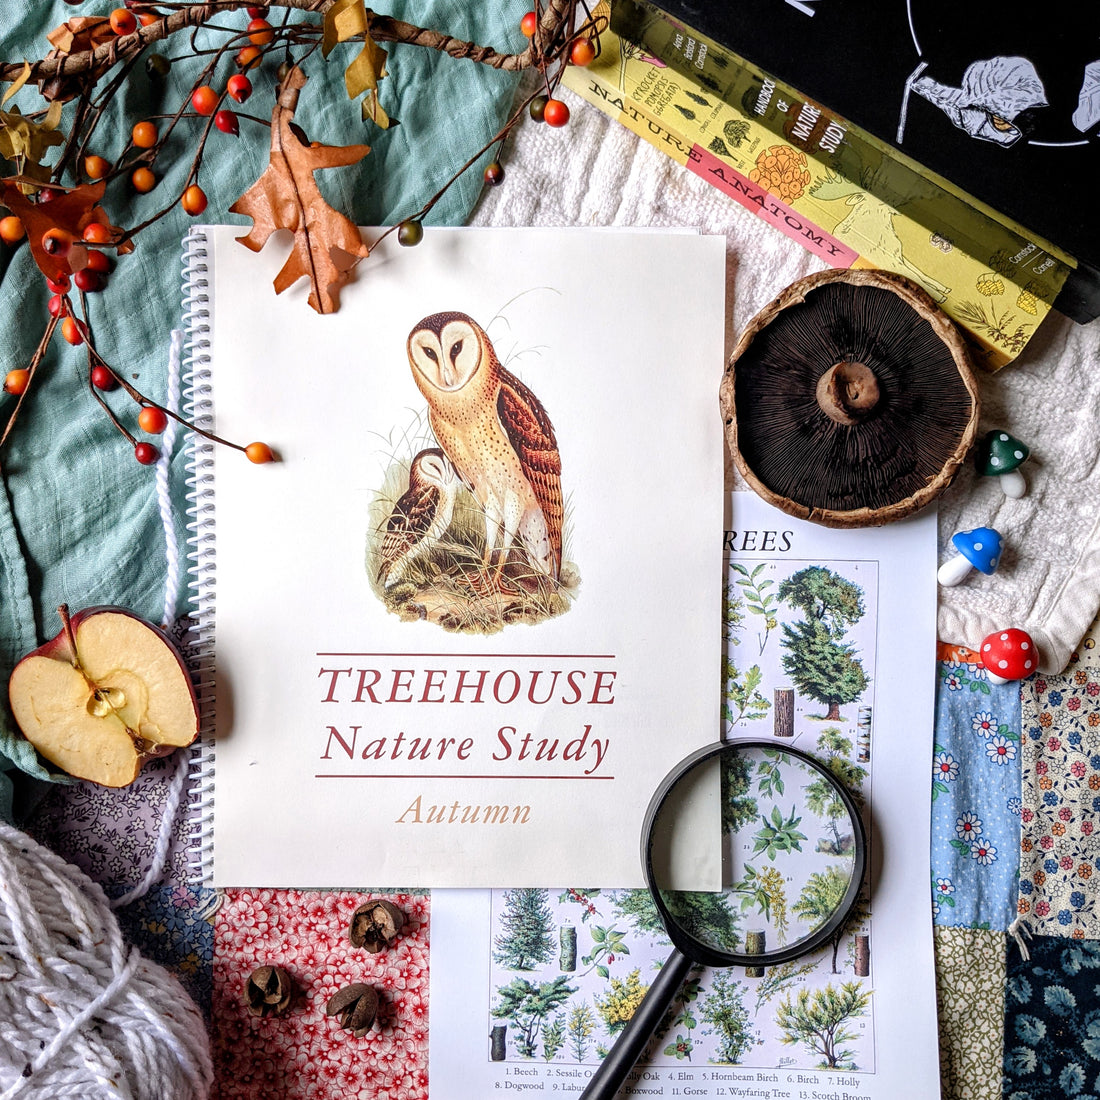 Treehouse Nature Study: Autumn (Small Group License)